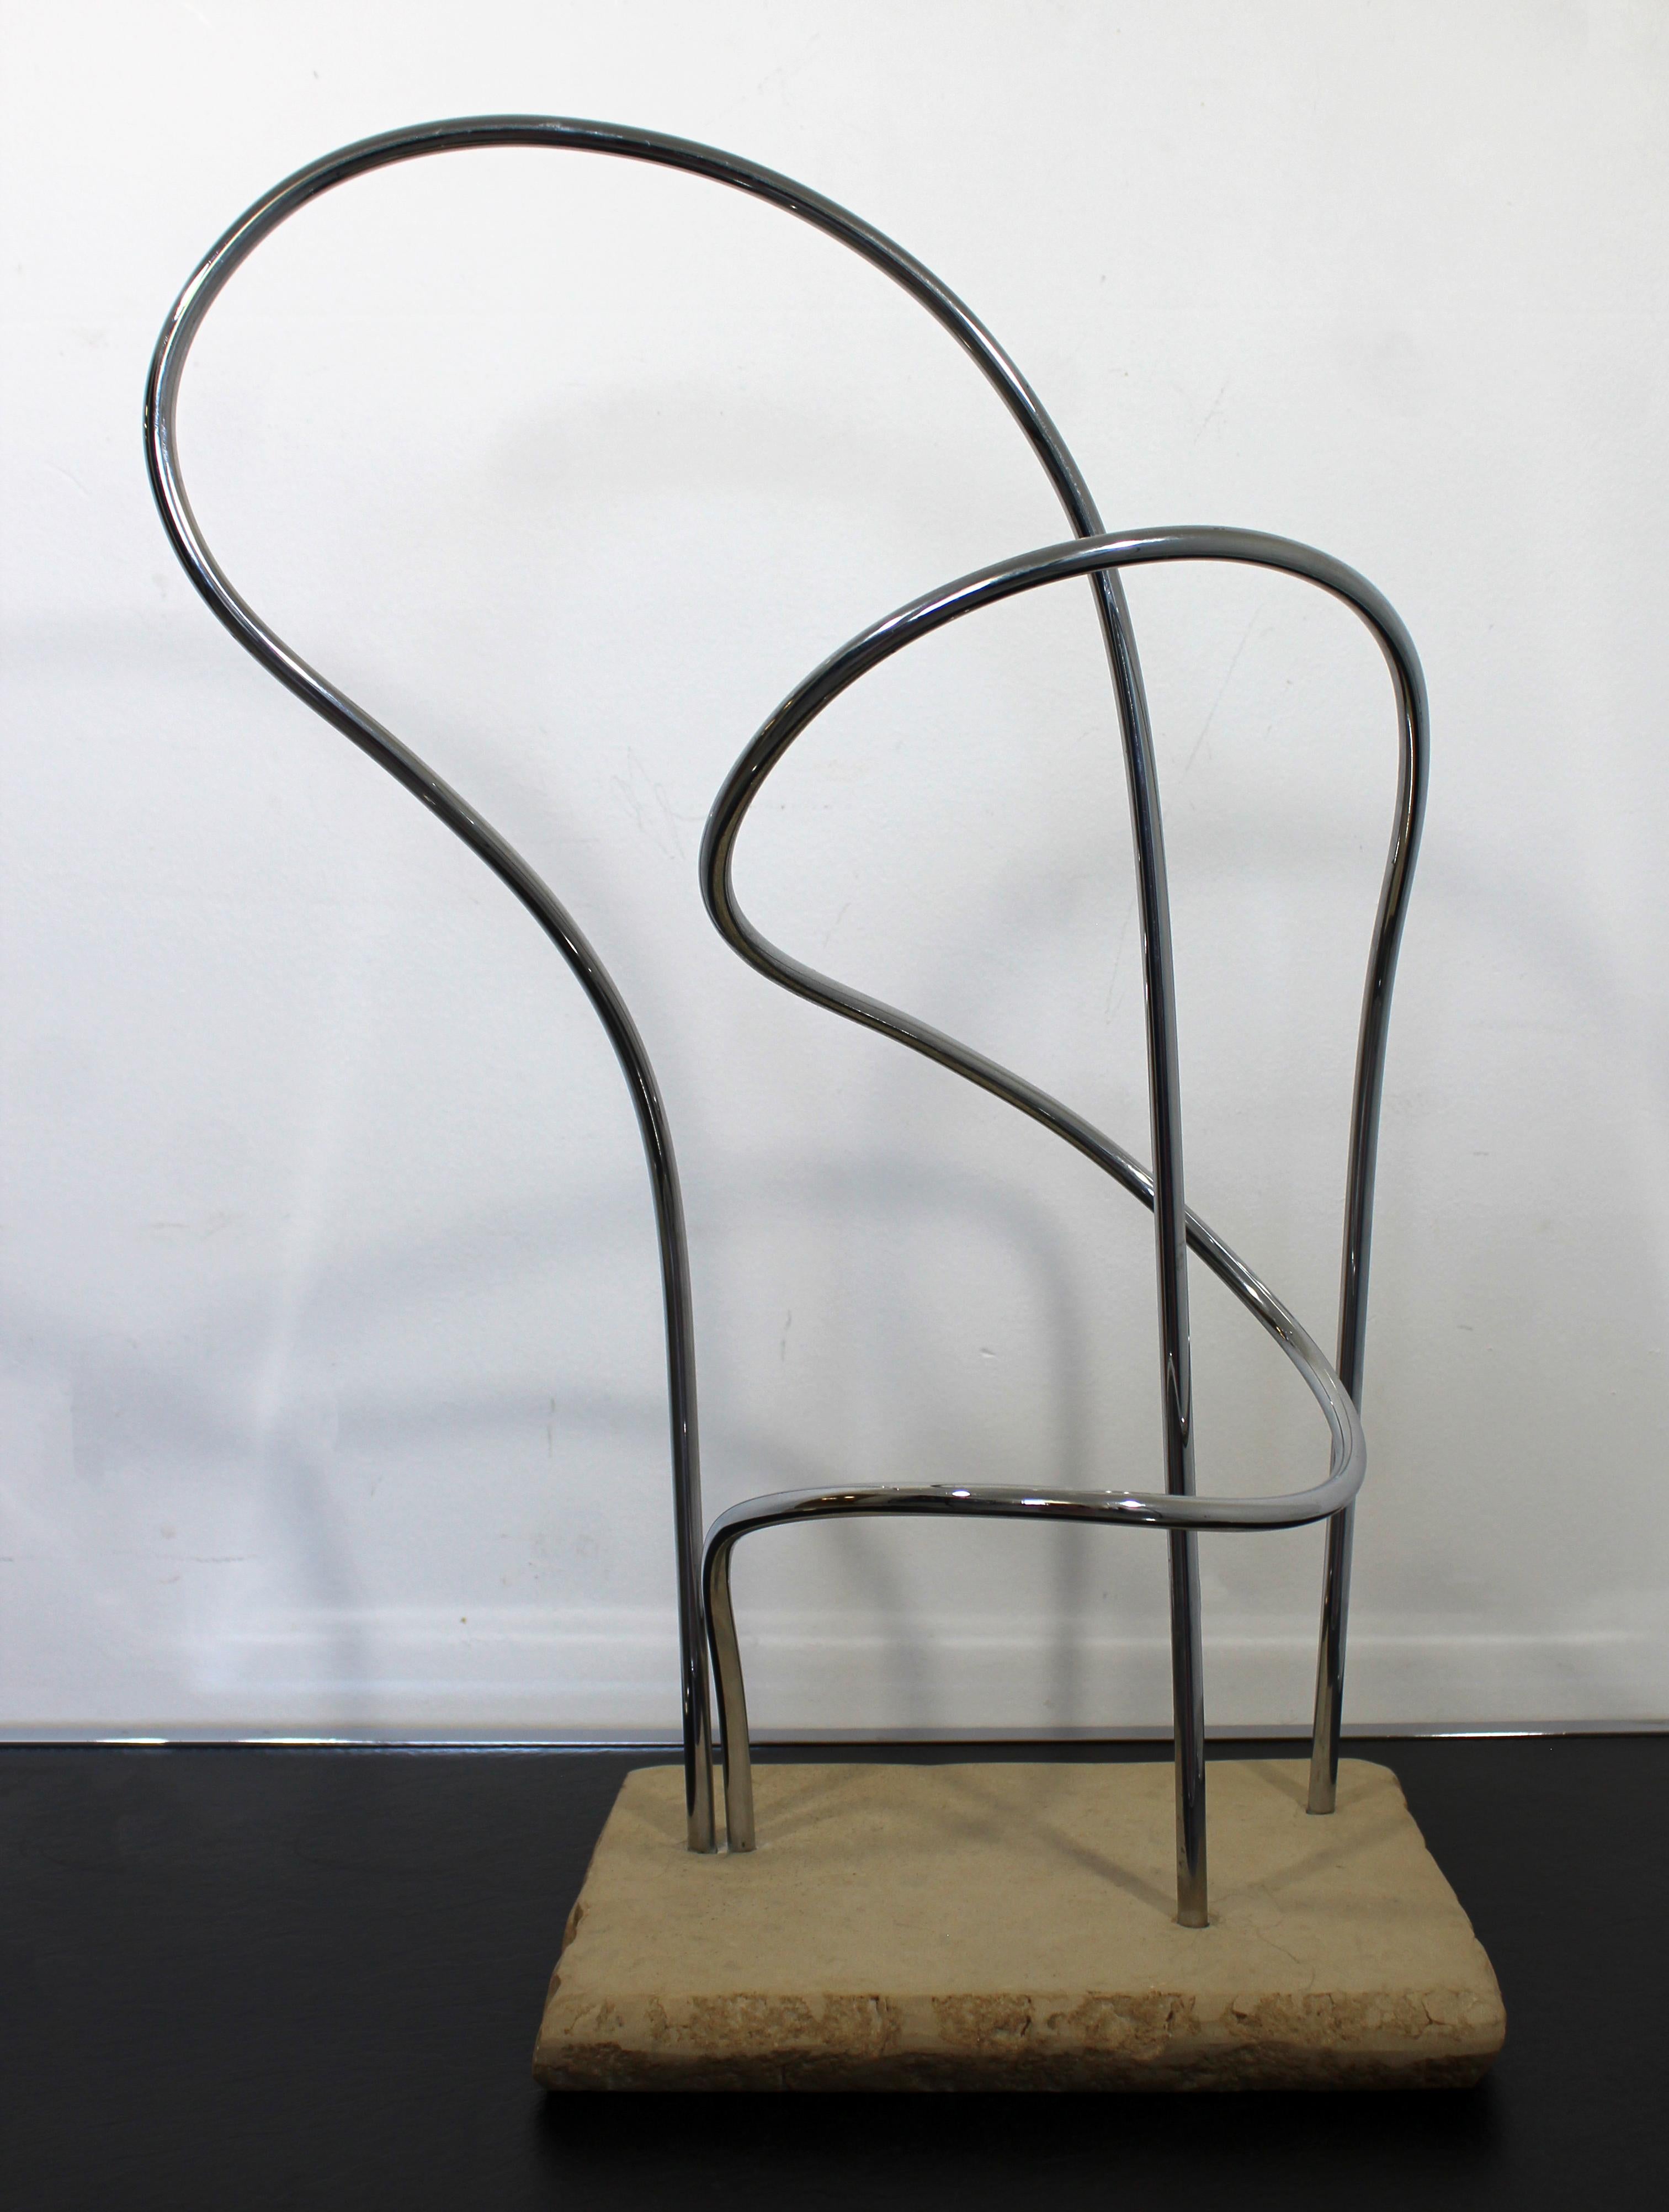 For your consideration is magnificent metal wire interlined sculpture signed Nani 1973 (23 x 12). James Nani (1926-2016) was a Detroit artist for over 50 years and is known internationally for his metal and acrylic sculptures. His work is currently